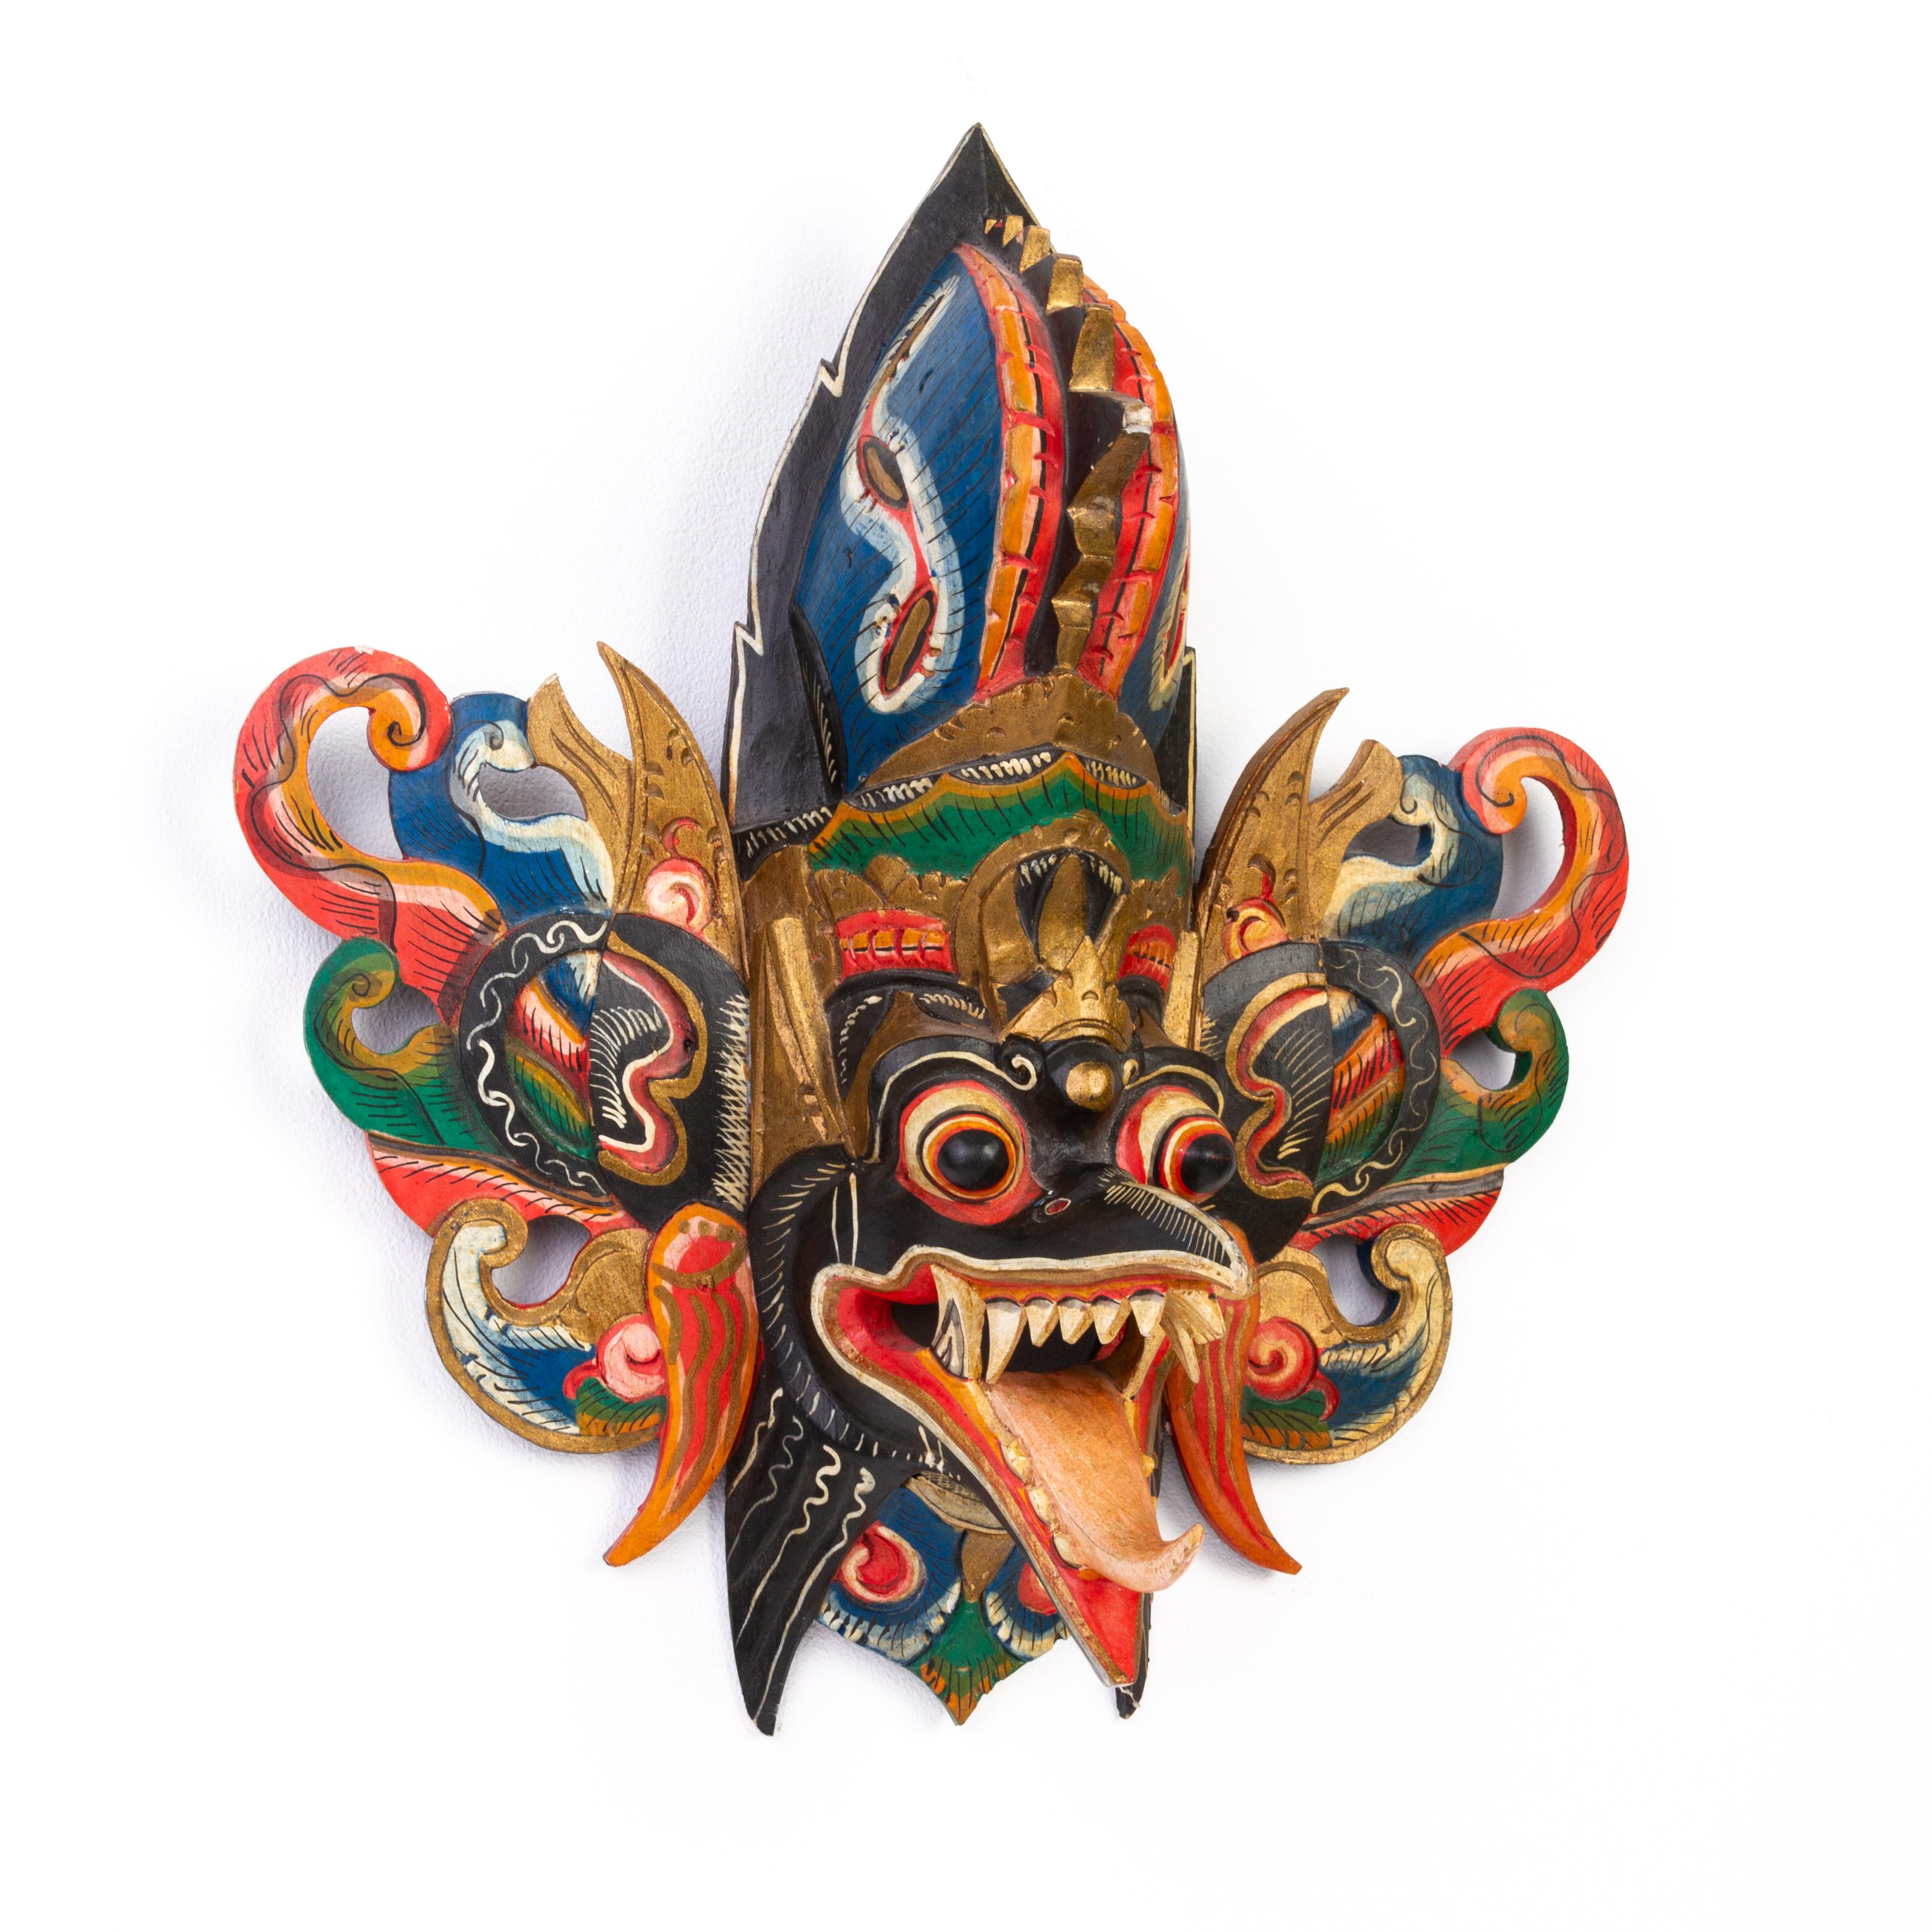 2nd half of the 20th century, a Balinese mask made of polychromed light wood, ready to hang. Vibrant colours and well carved.